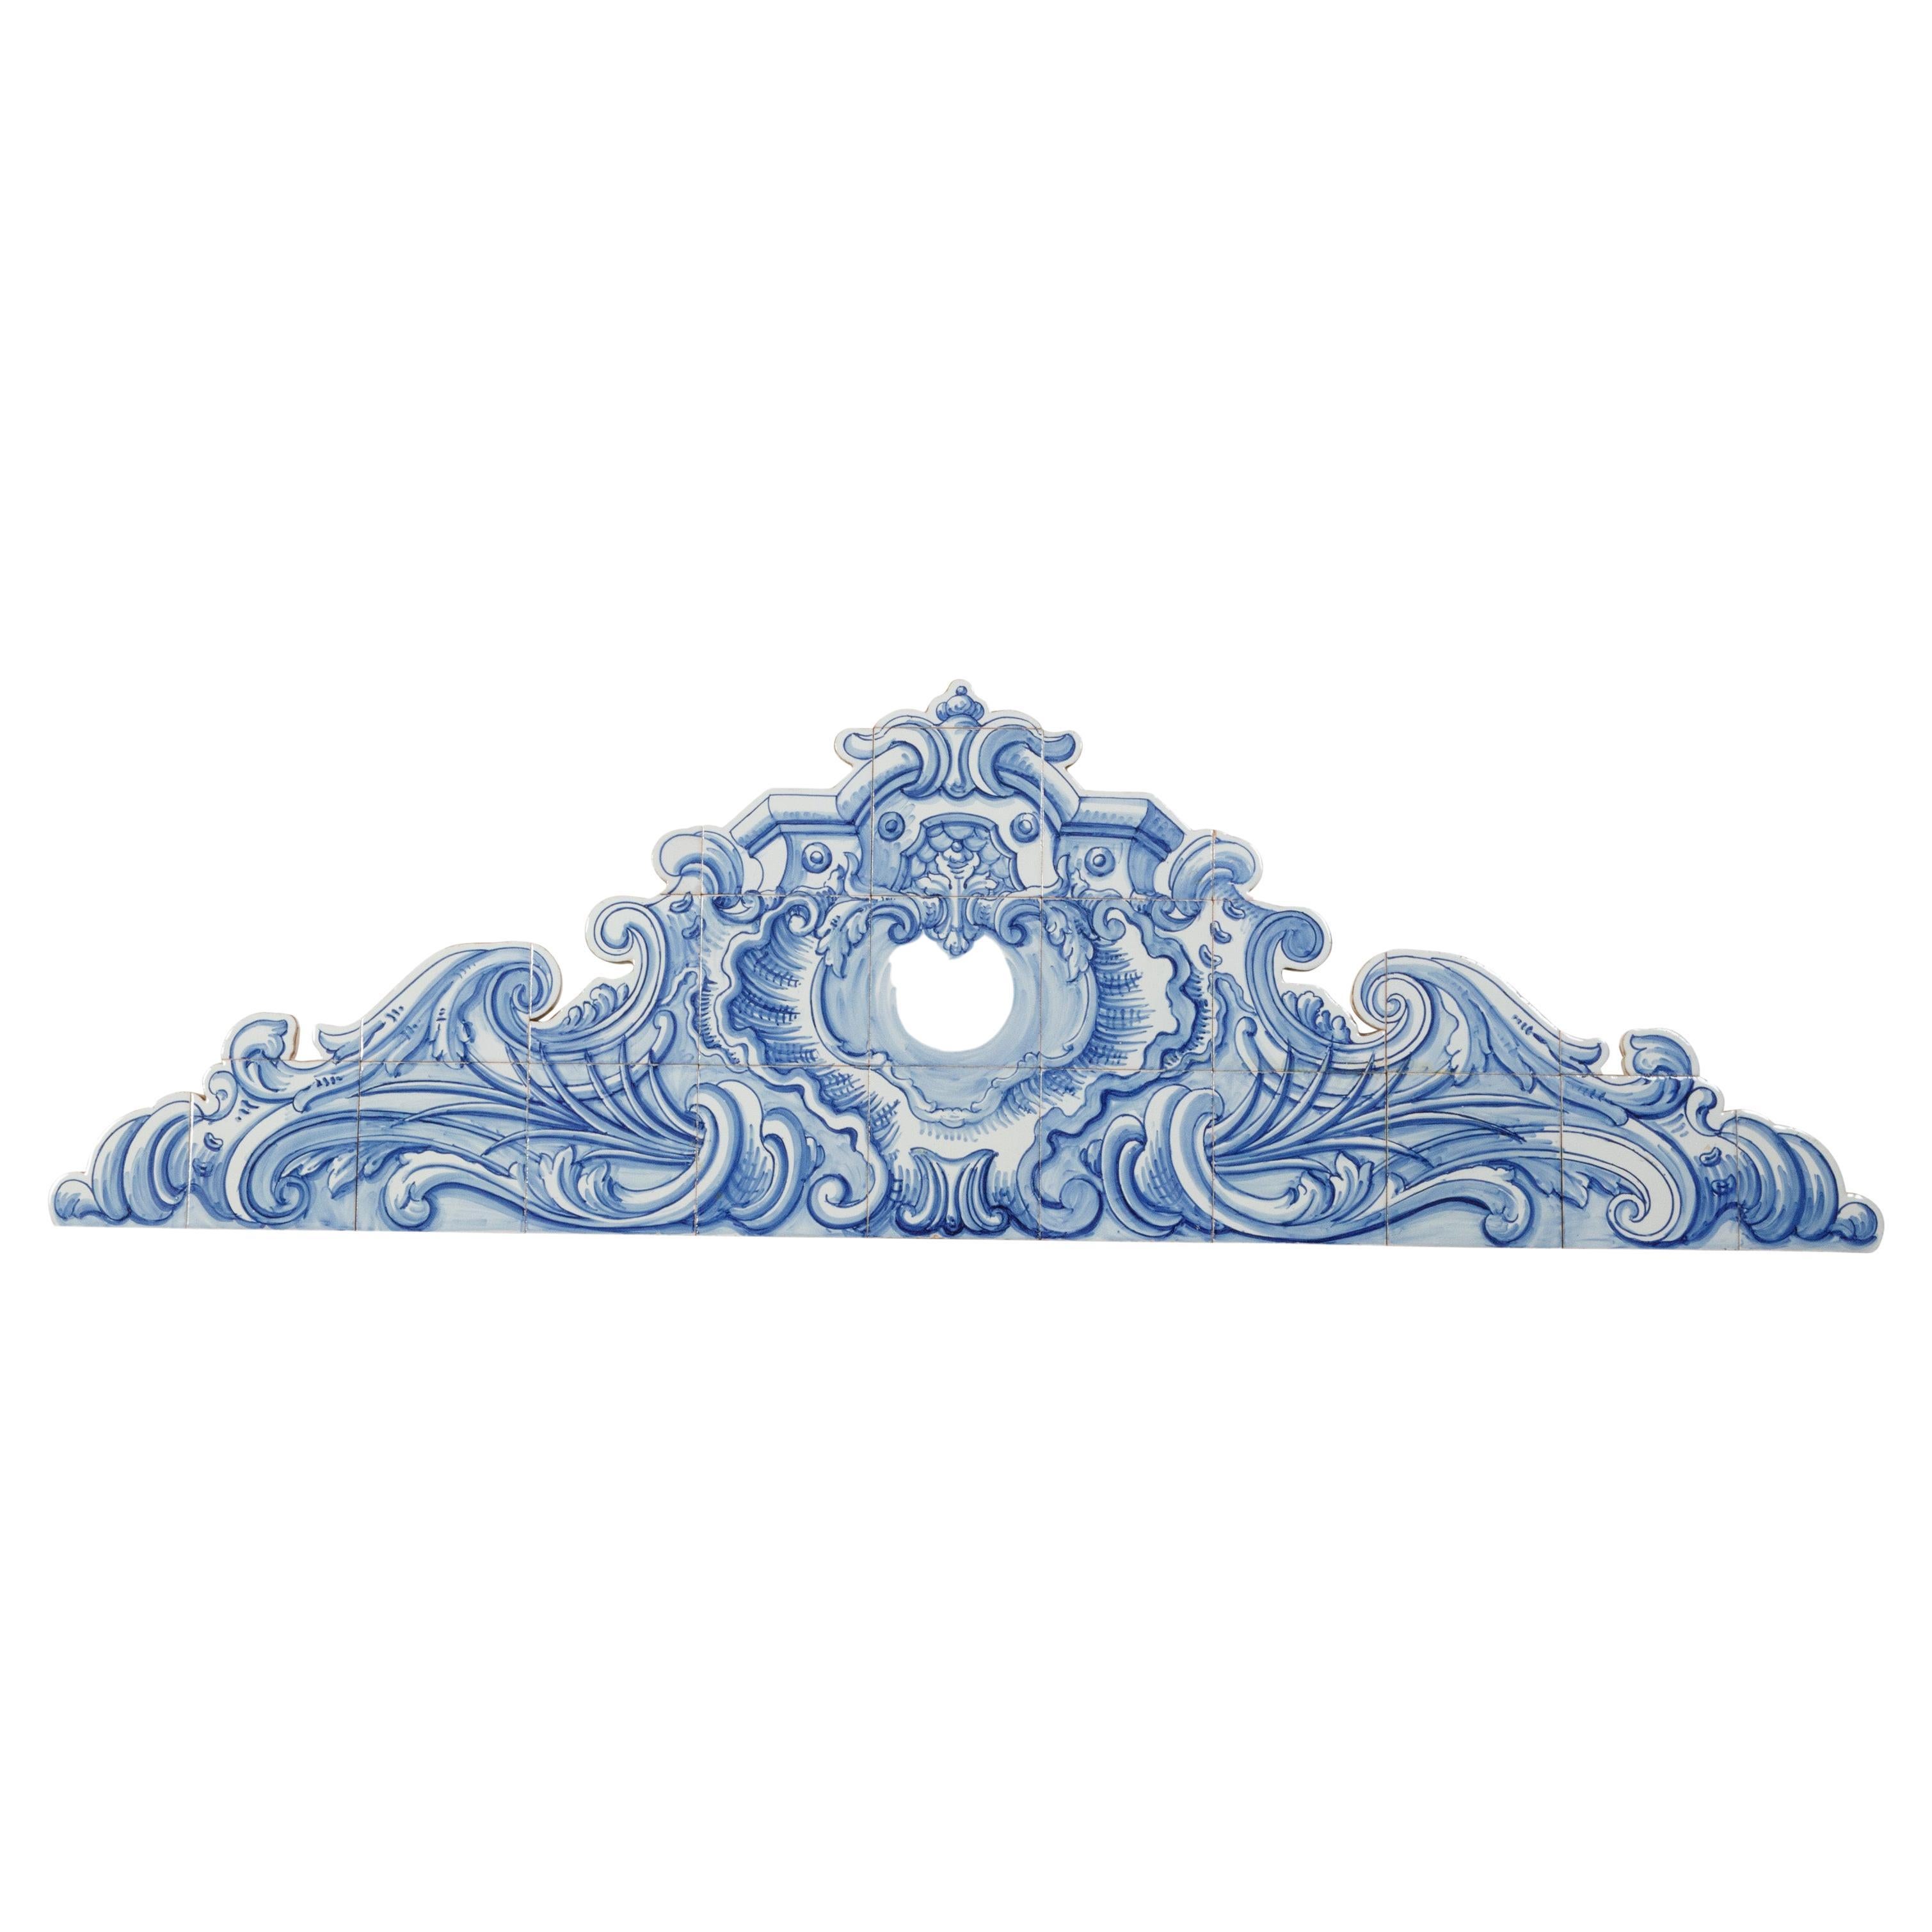 Blue and White Rococo Style Delft Tiles Architectural Fragment on Wood